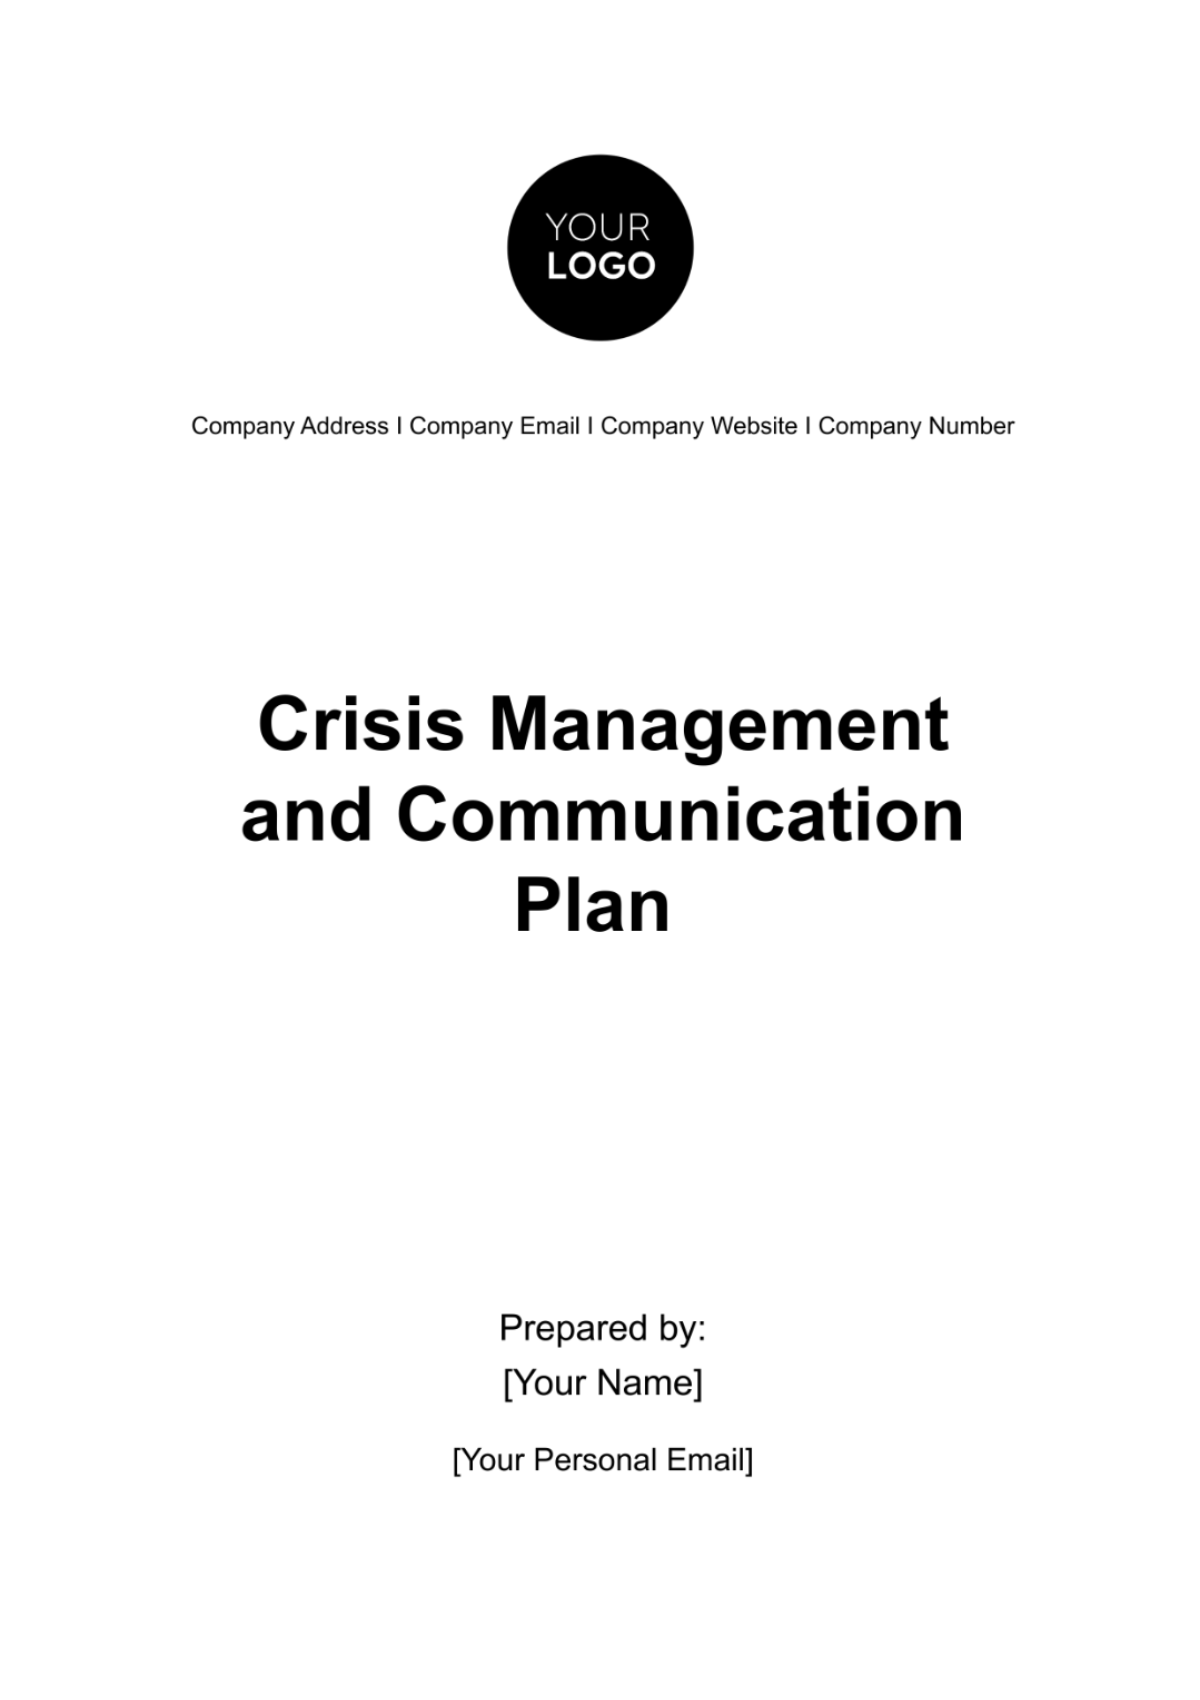 Free Crisis Management and Communication Plan HR Template